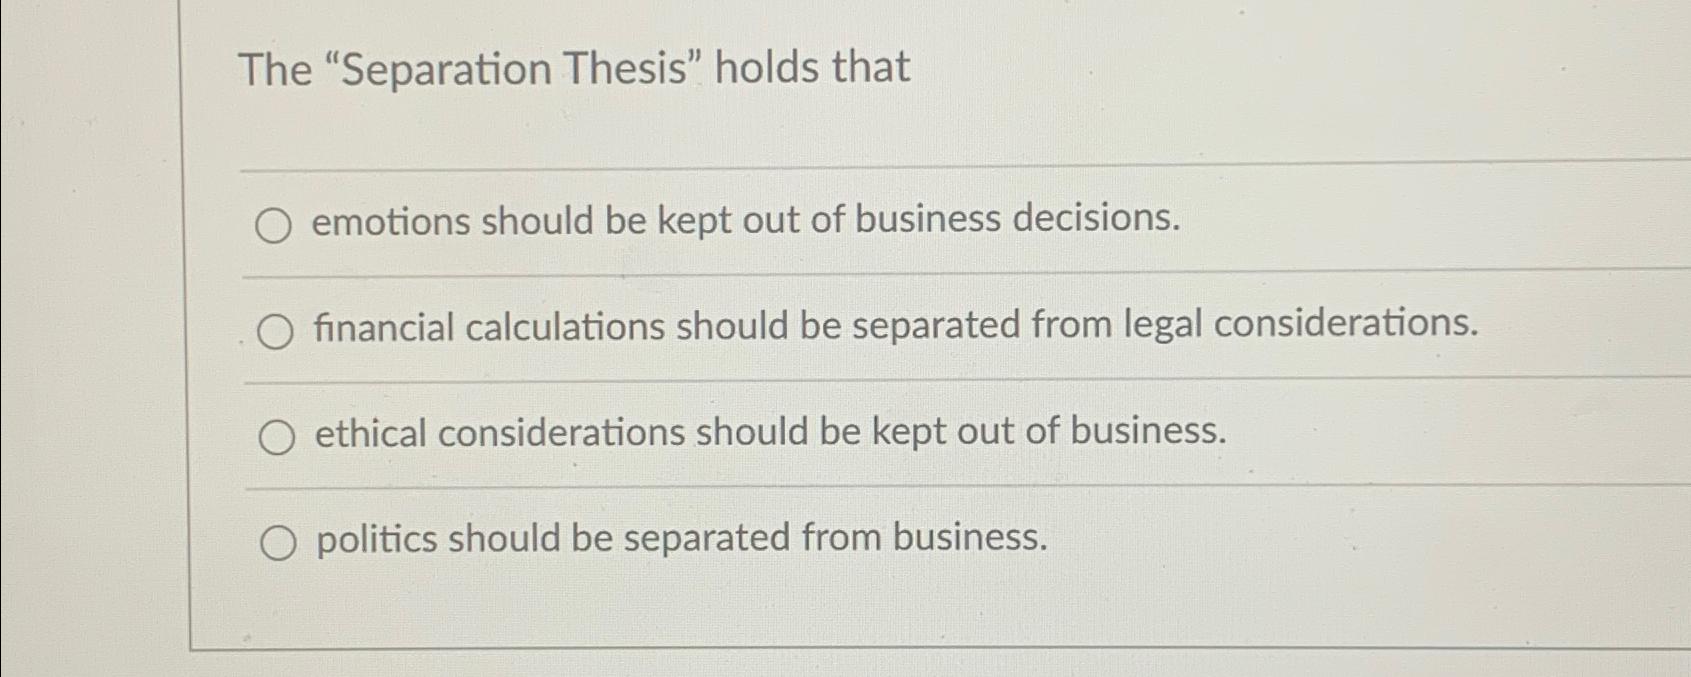 separation thesis theory